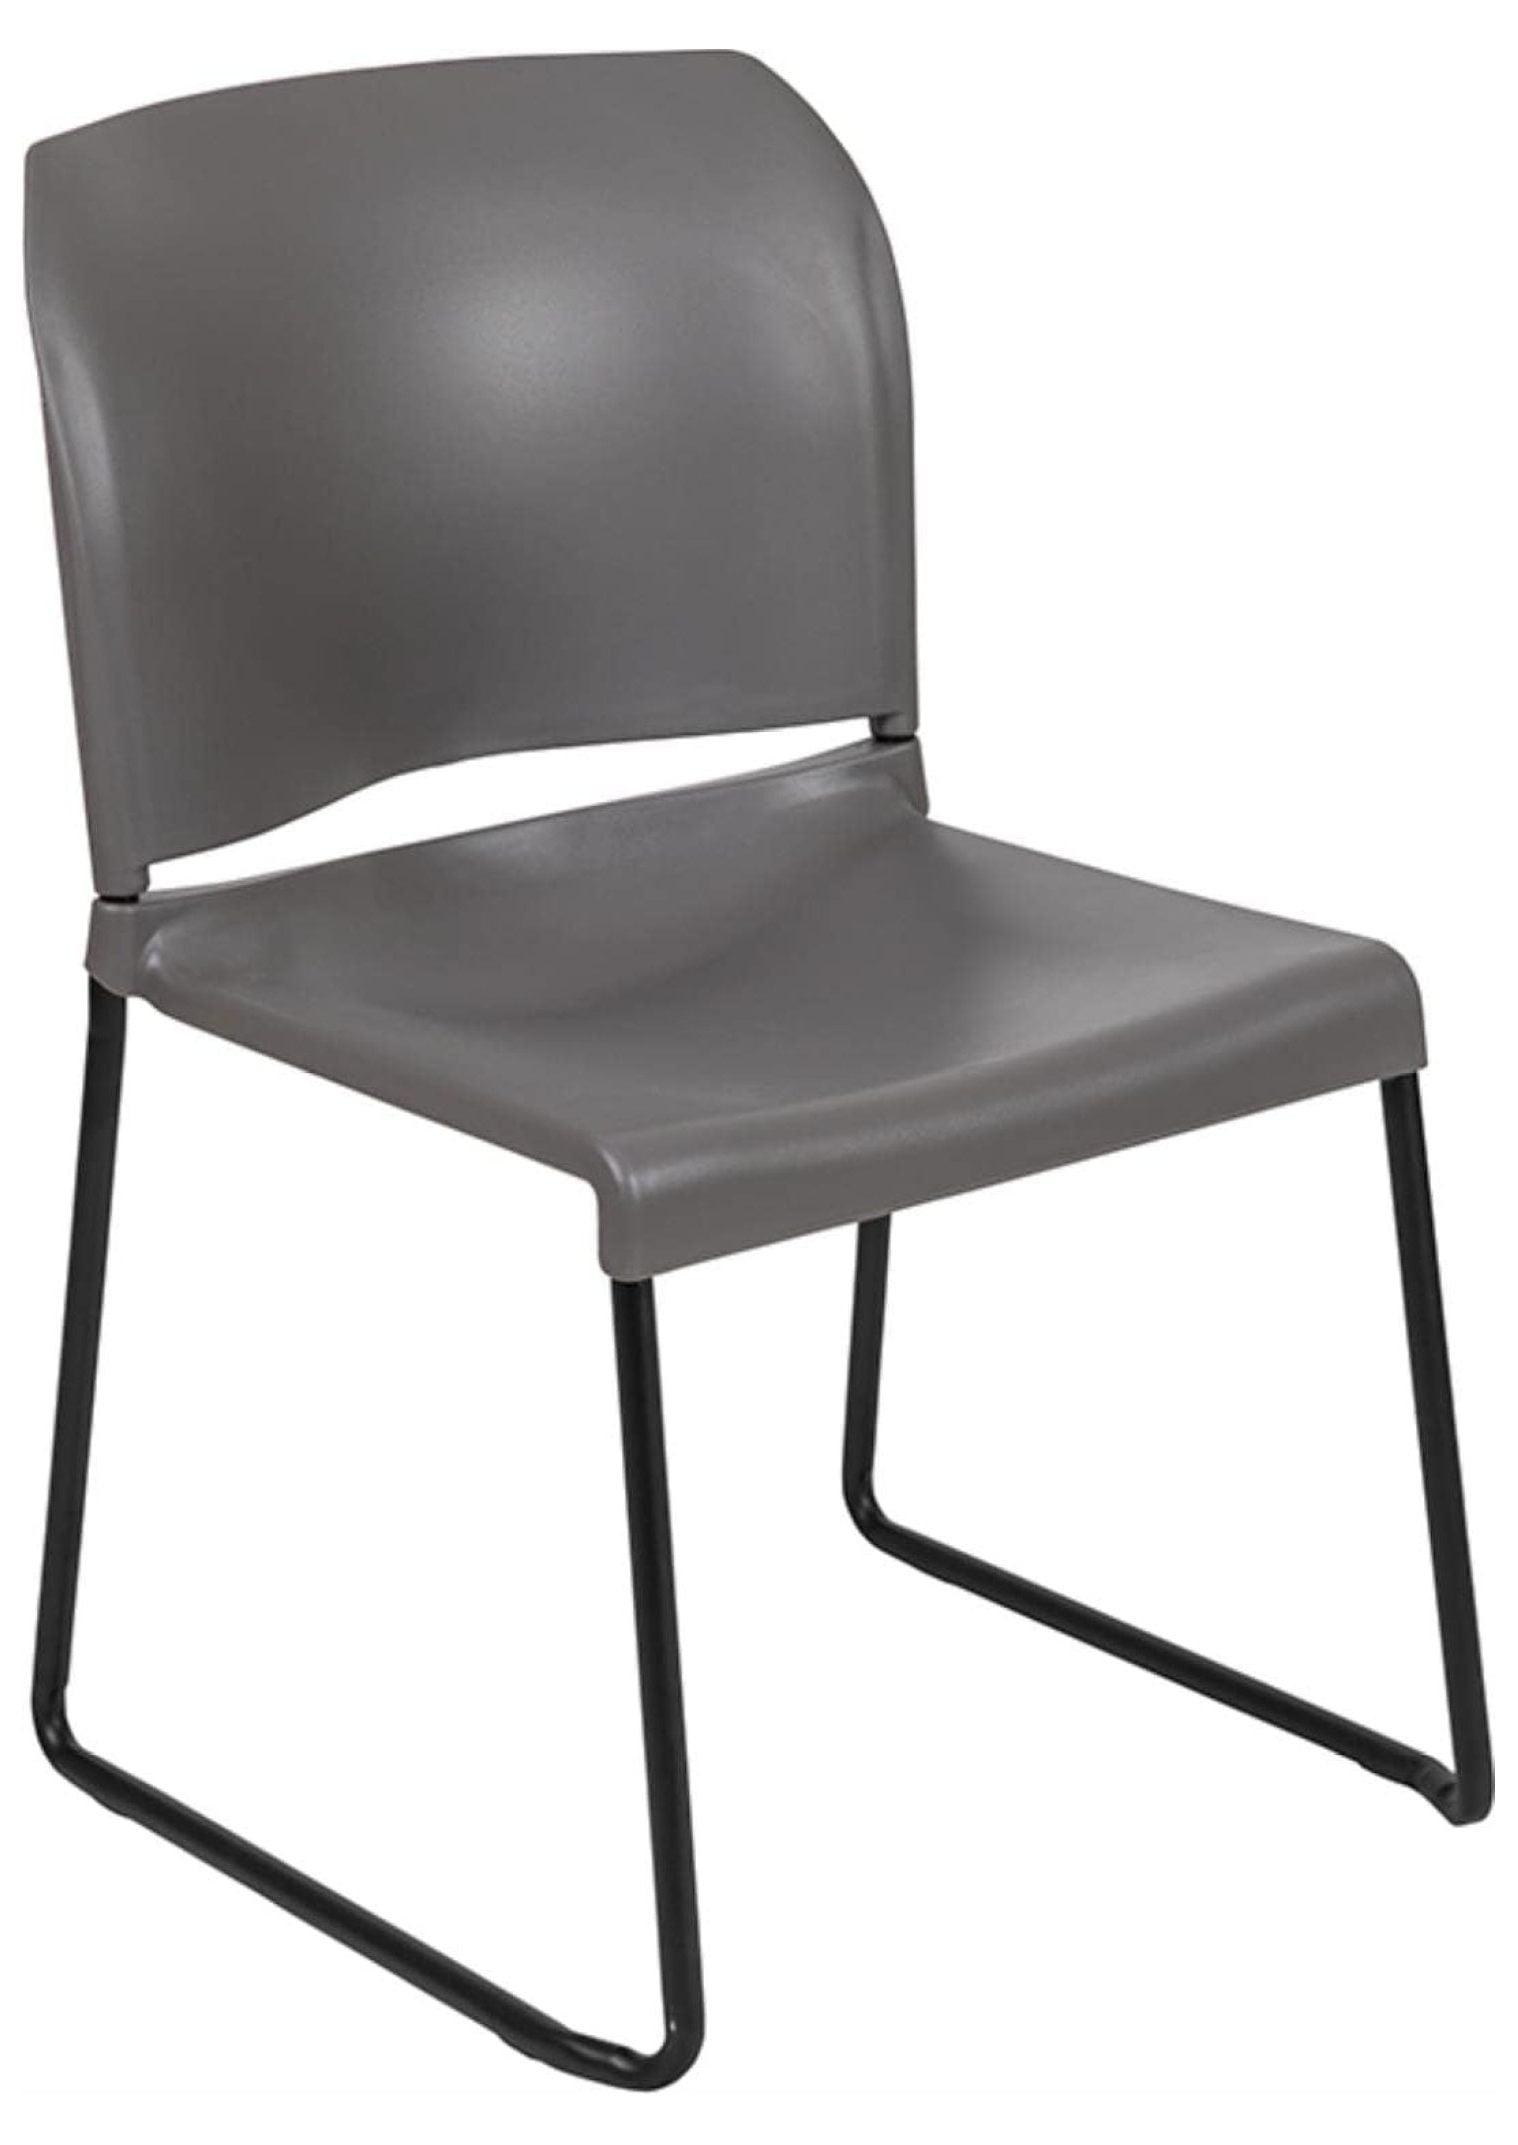 Gray Metal Armless Stacking Chair with Full Back